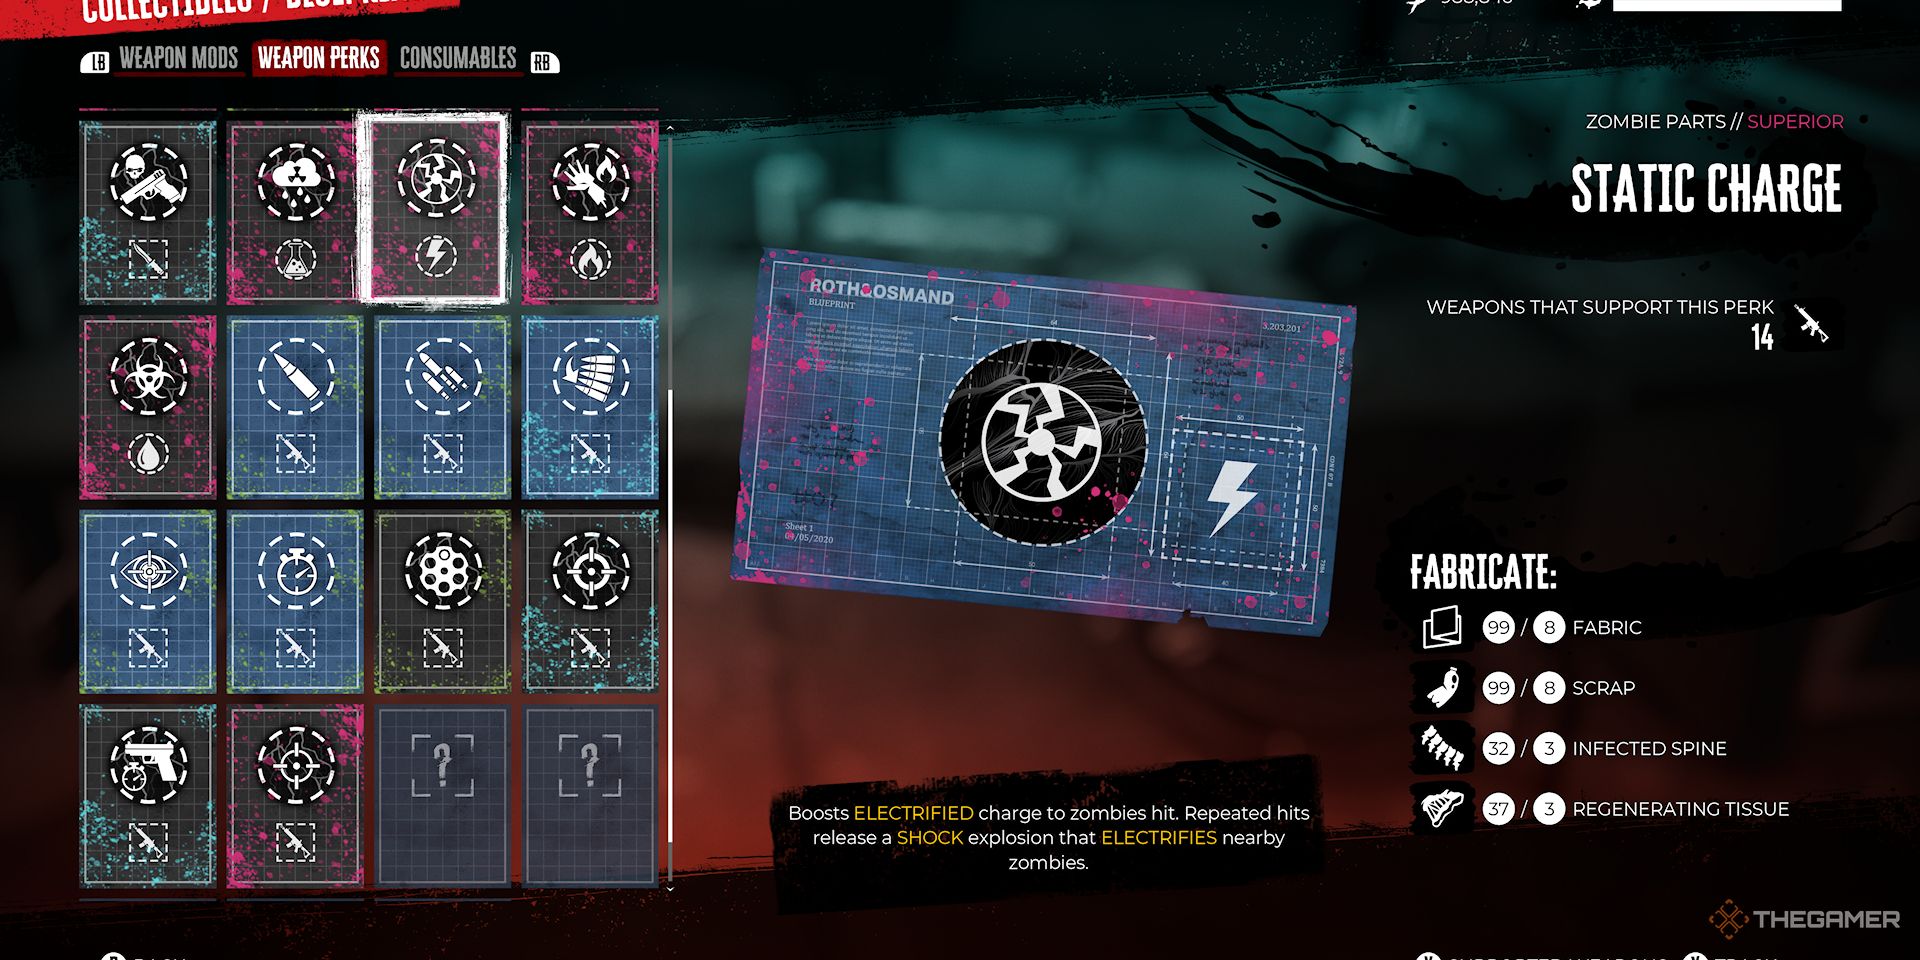 Image shows the Static Charge Perk in Dead Island 2